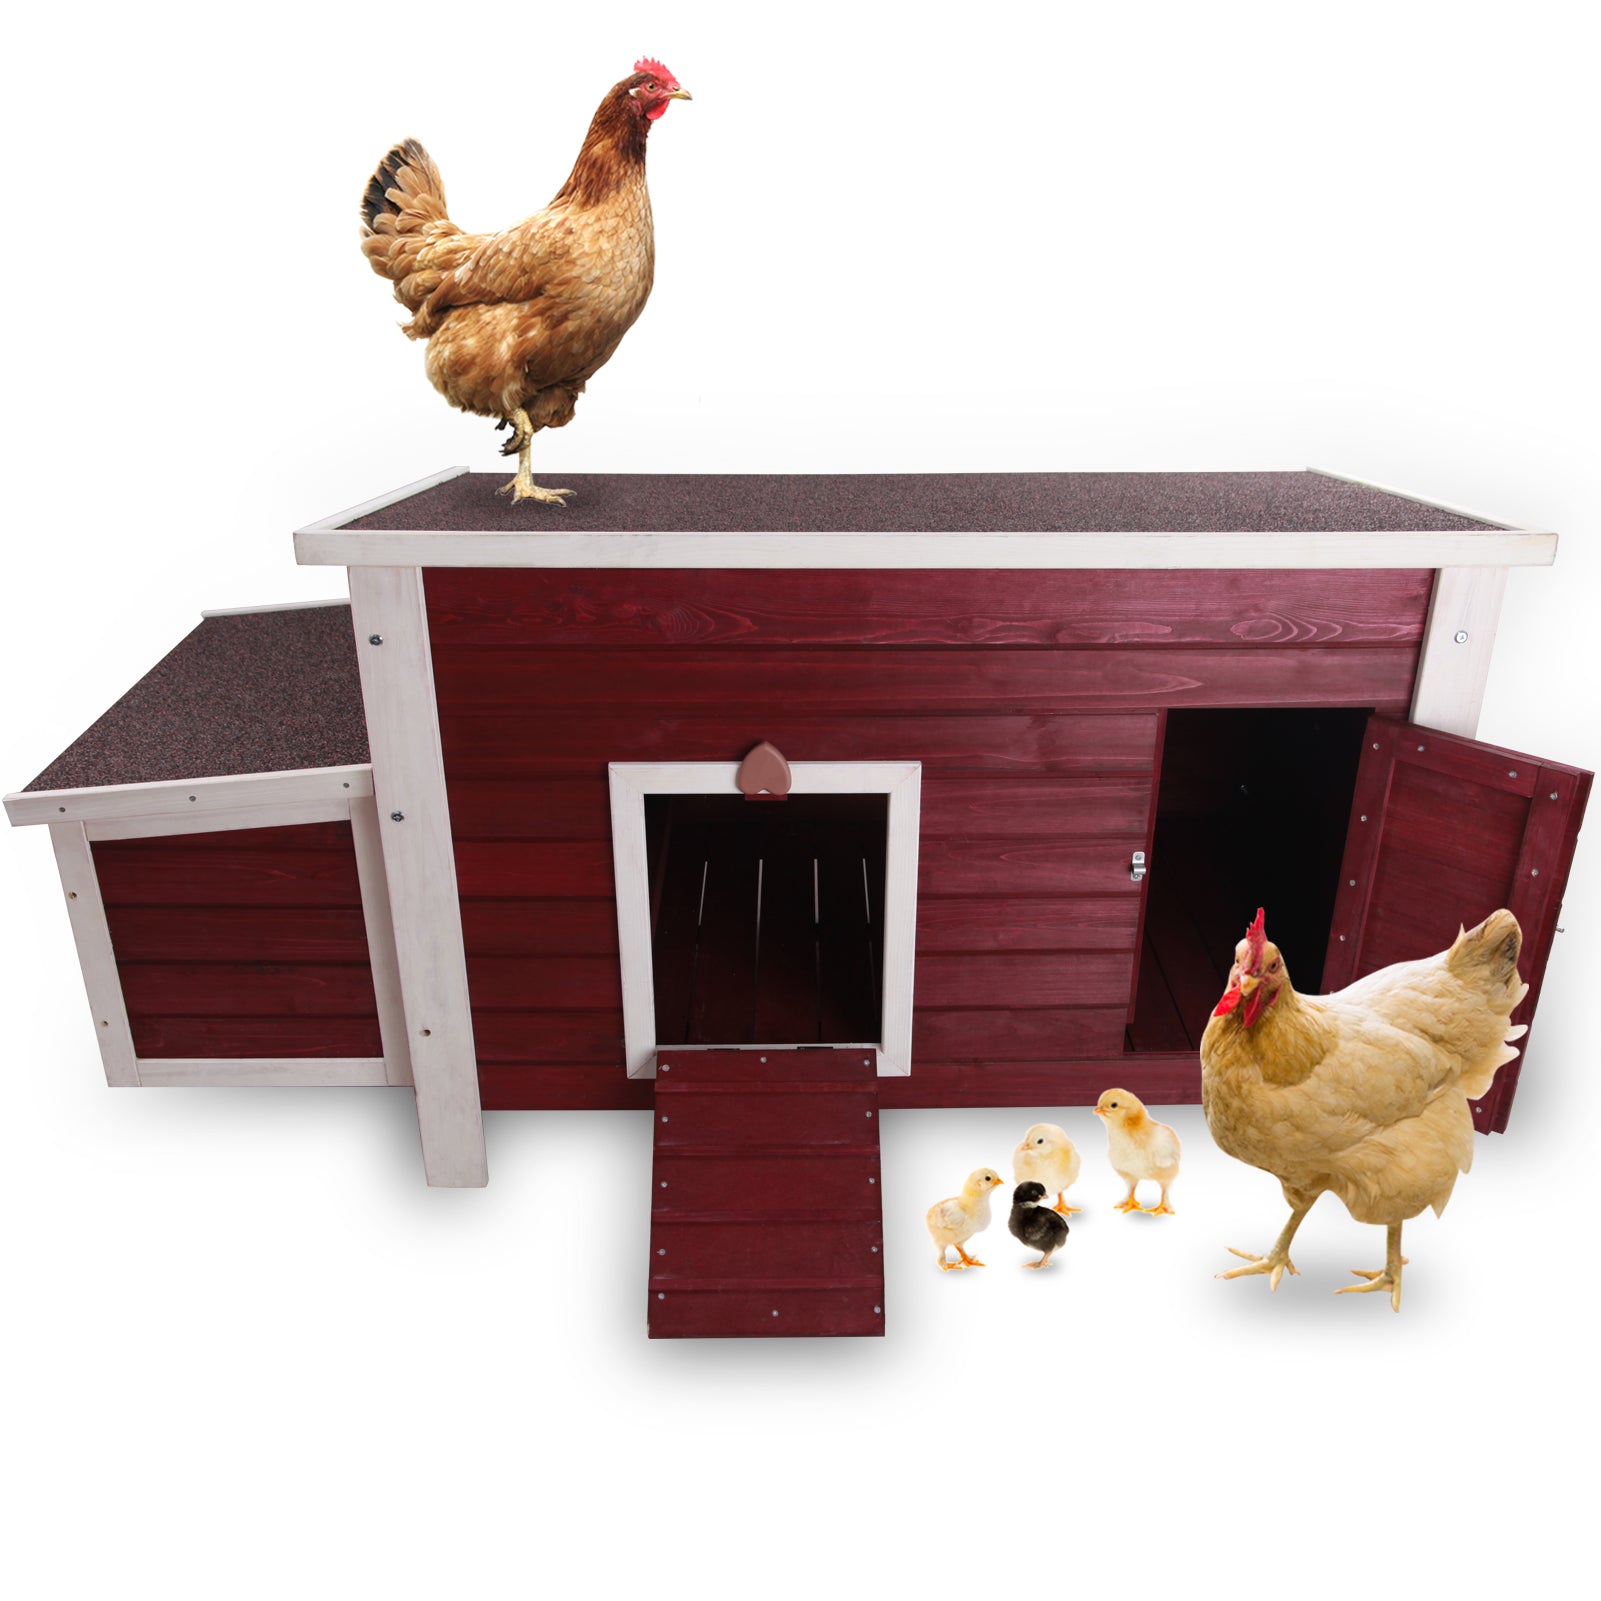 petsfit-chicken-coop-with-nesting-box-outdoor-hen-house-with-removable-bottom-for-easy-cleaning-weatherproof-poultry-cage-rabbit-hutch-wood-duck-house-red-01